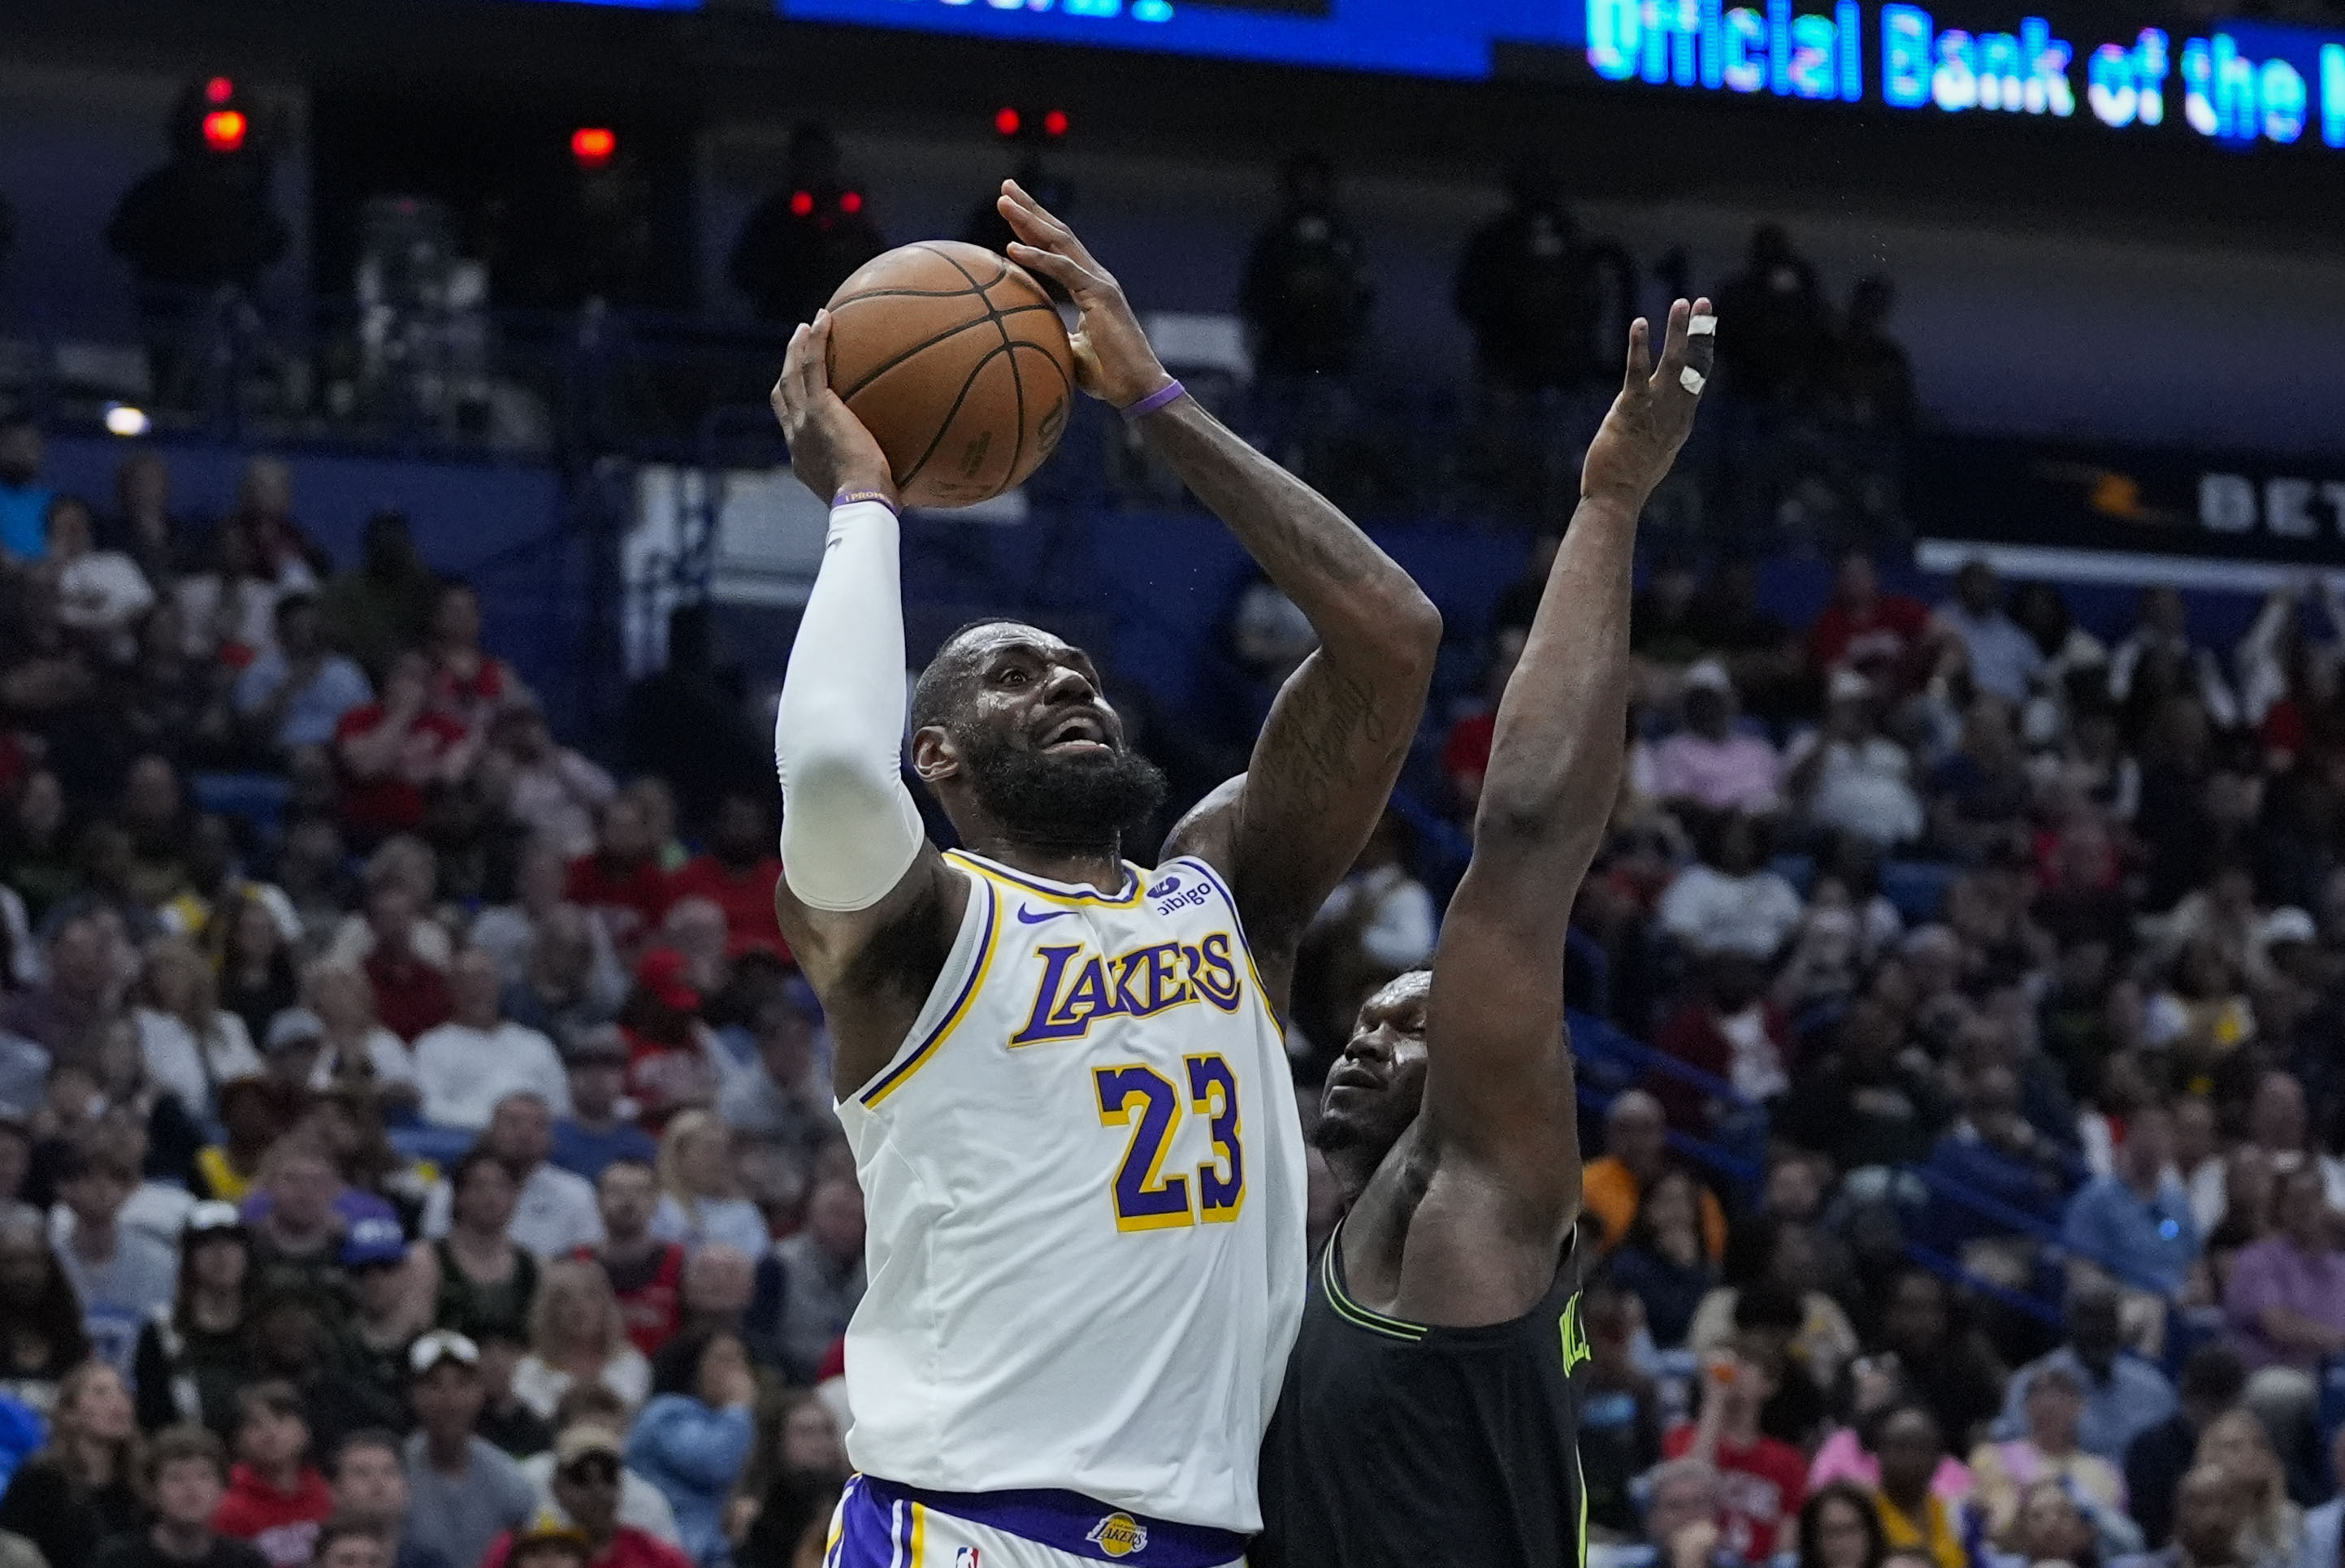 lebron james' triple-double lifts lakers over pelicans and into a play-in rematch with new orleans